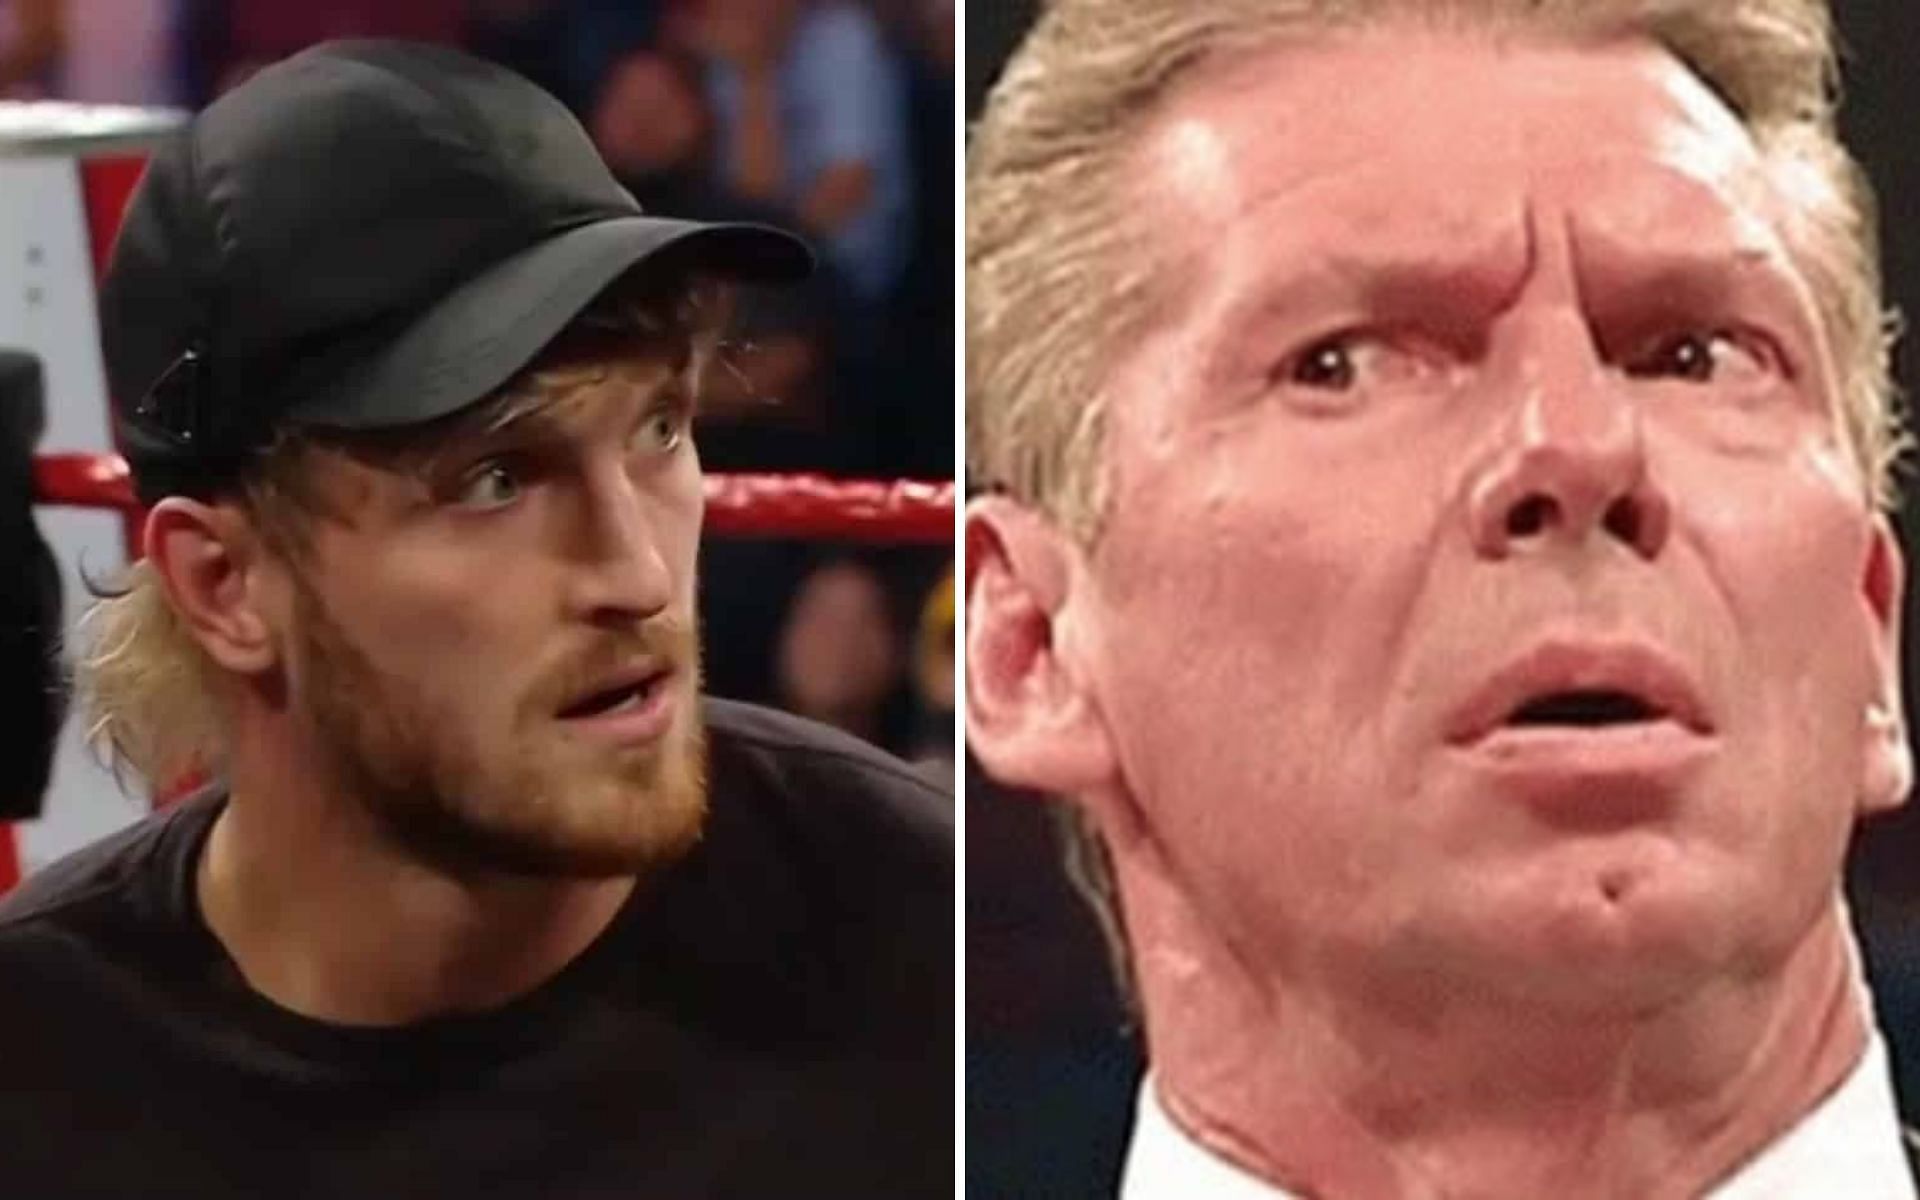 Vince McMahon roasted the social media star by saying nothing